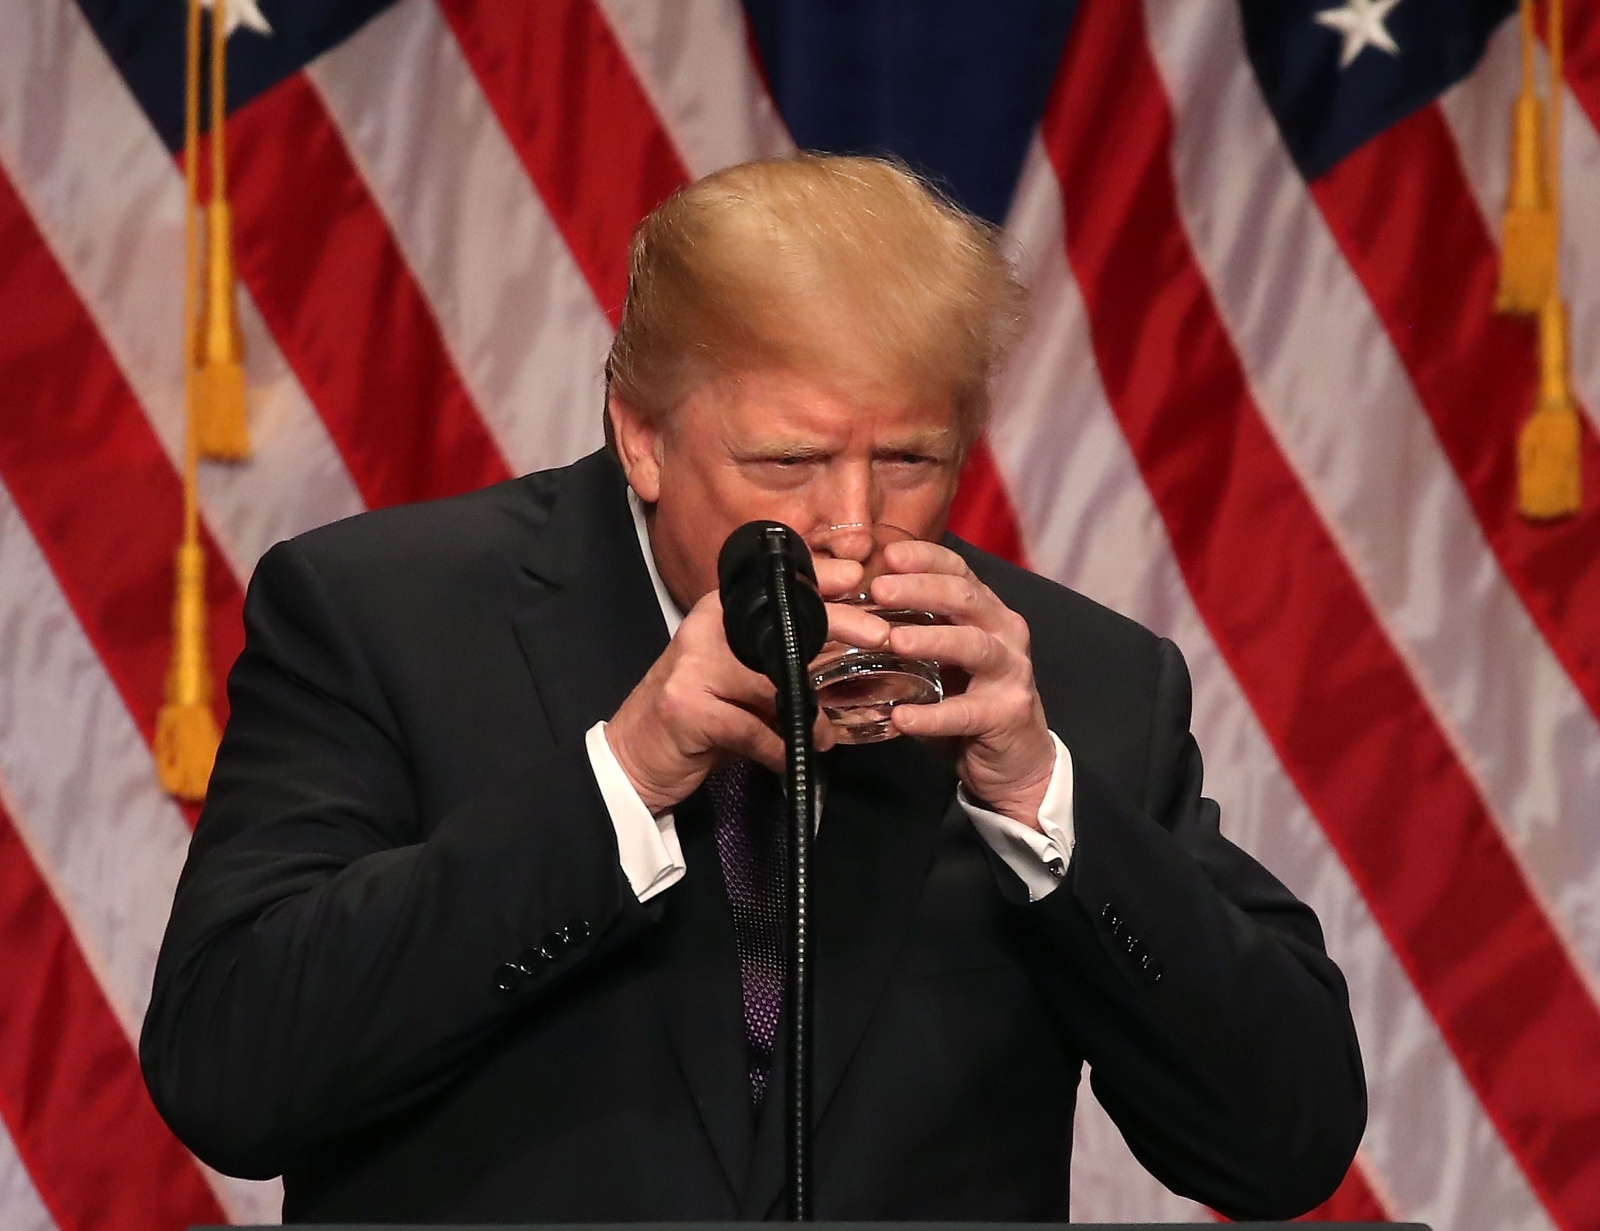 'Get the man a sippy cup': Trump awkwardly drinks water like a child